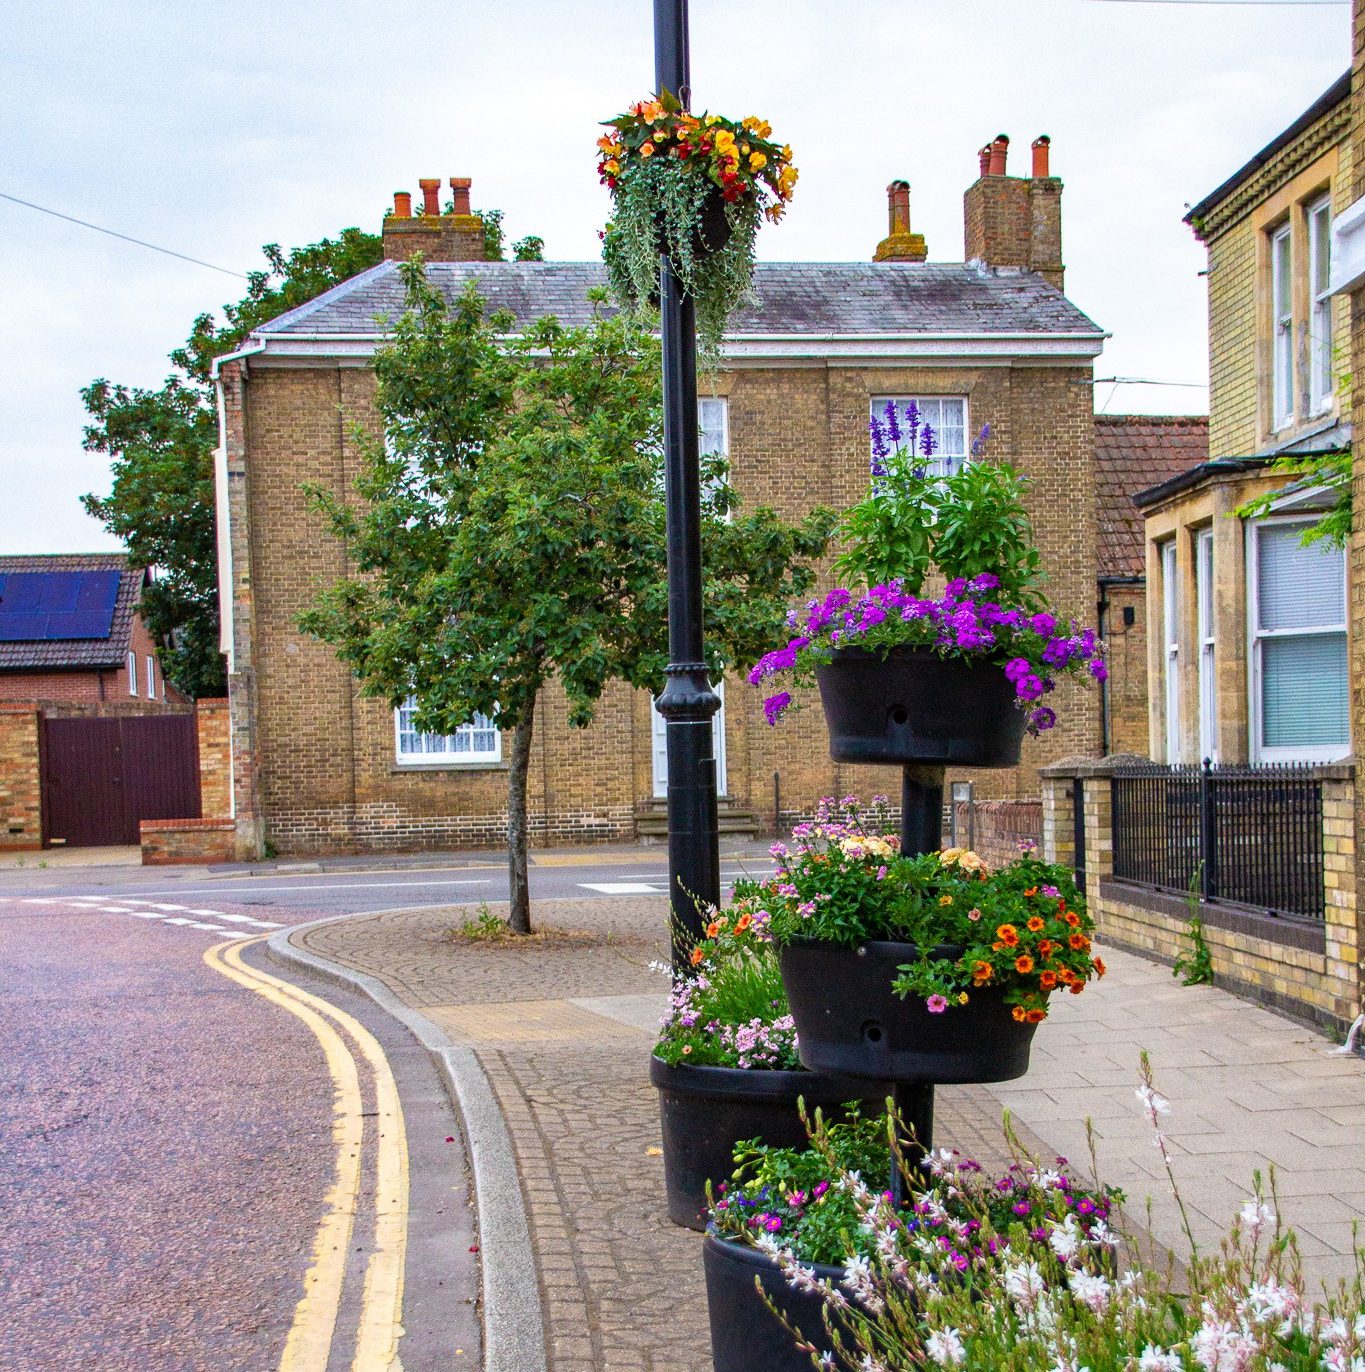 take £300 health and safety course before installing hanging baskets, council tells volunteers